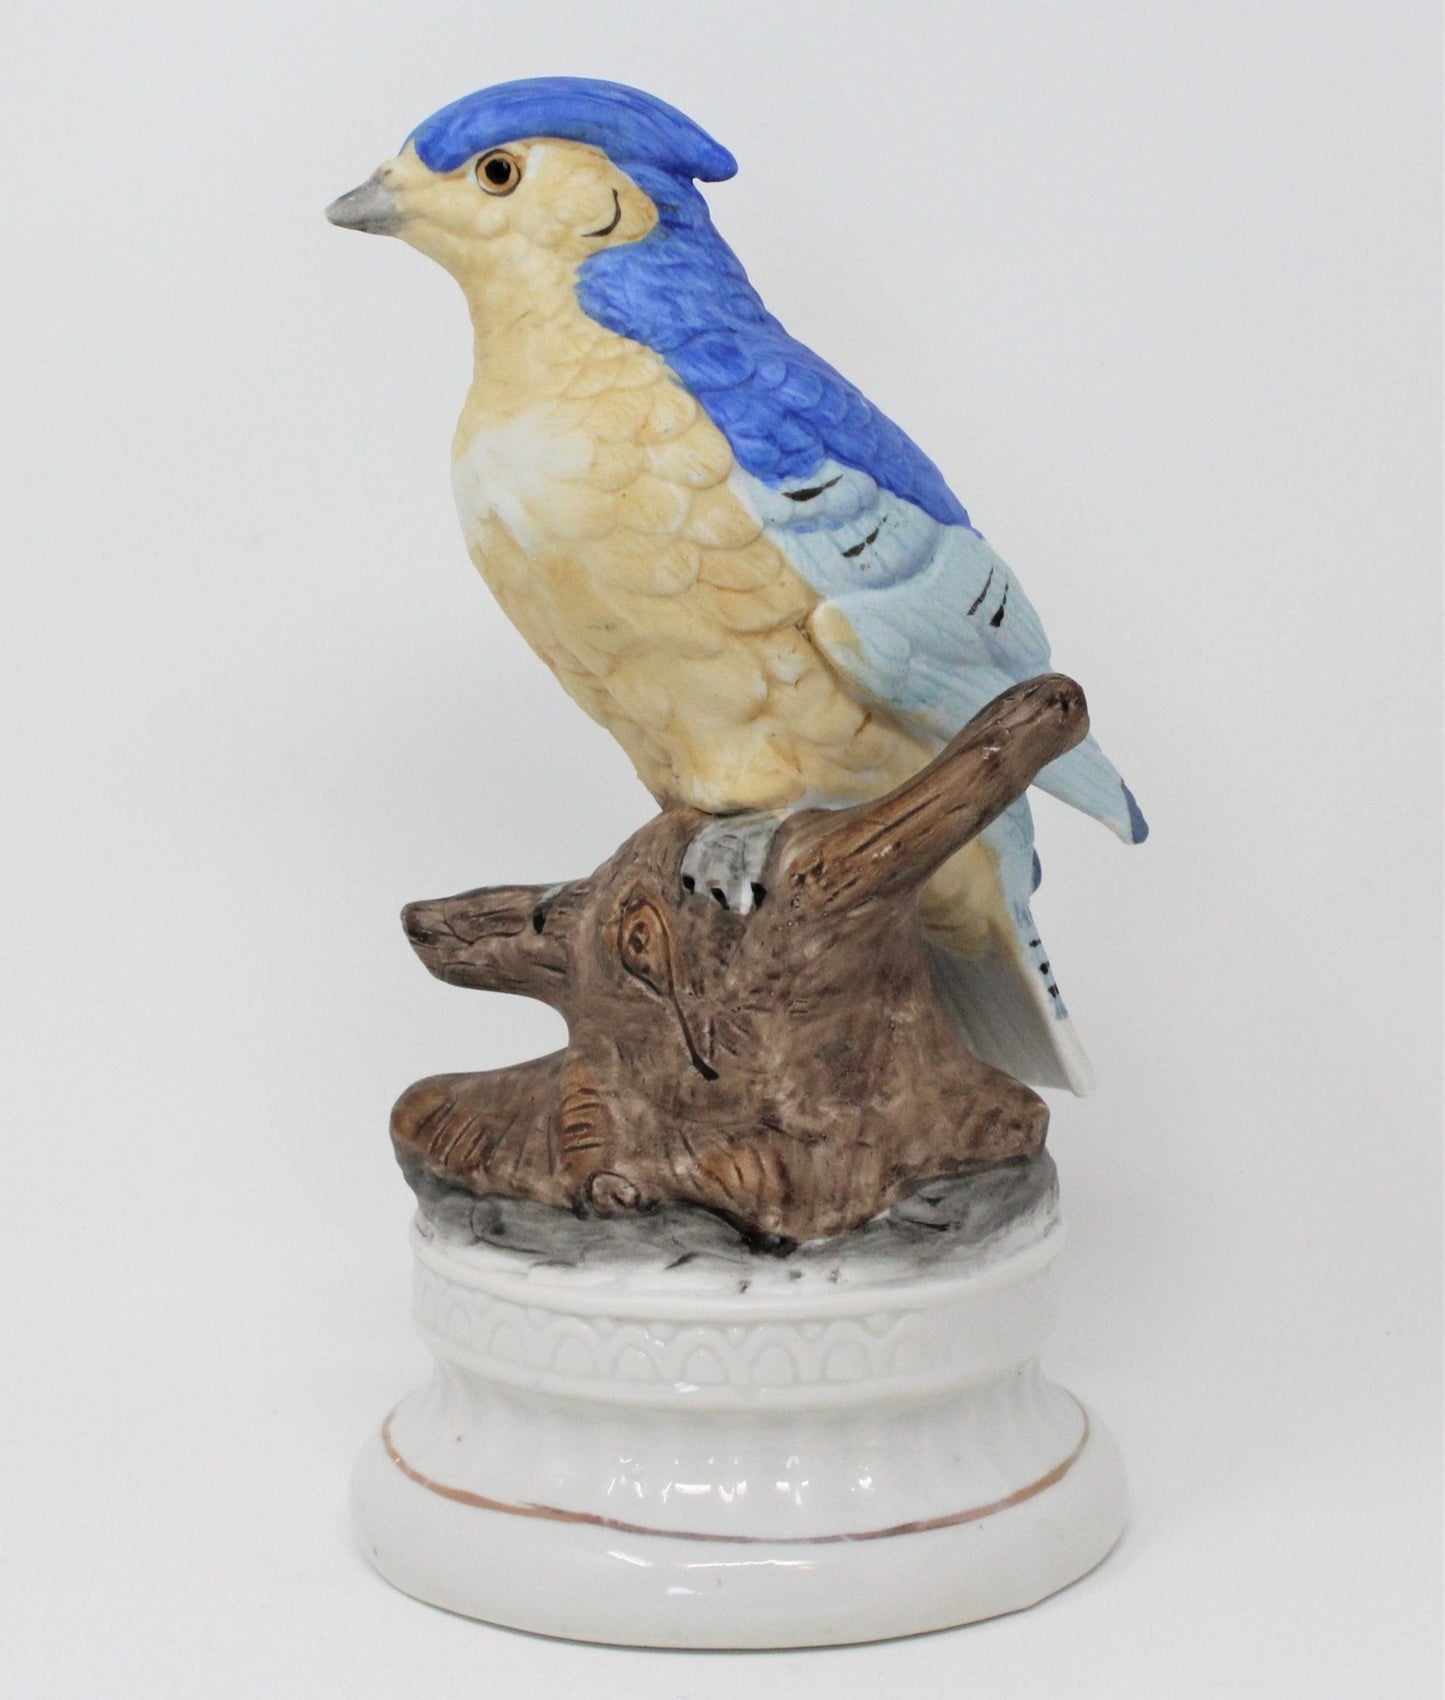 Music Box, Bluejay, plays Send in the Clowns, Porcelain, Vintage